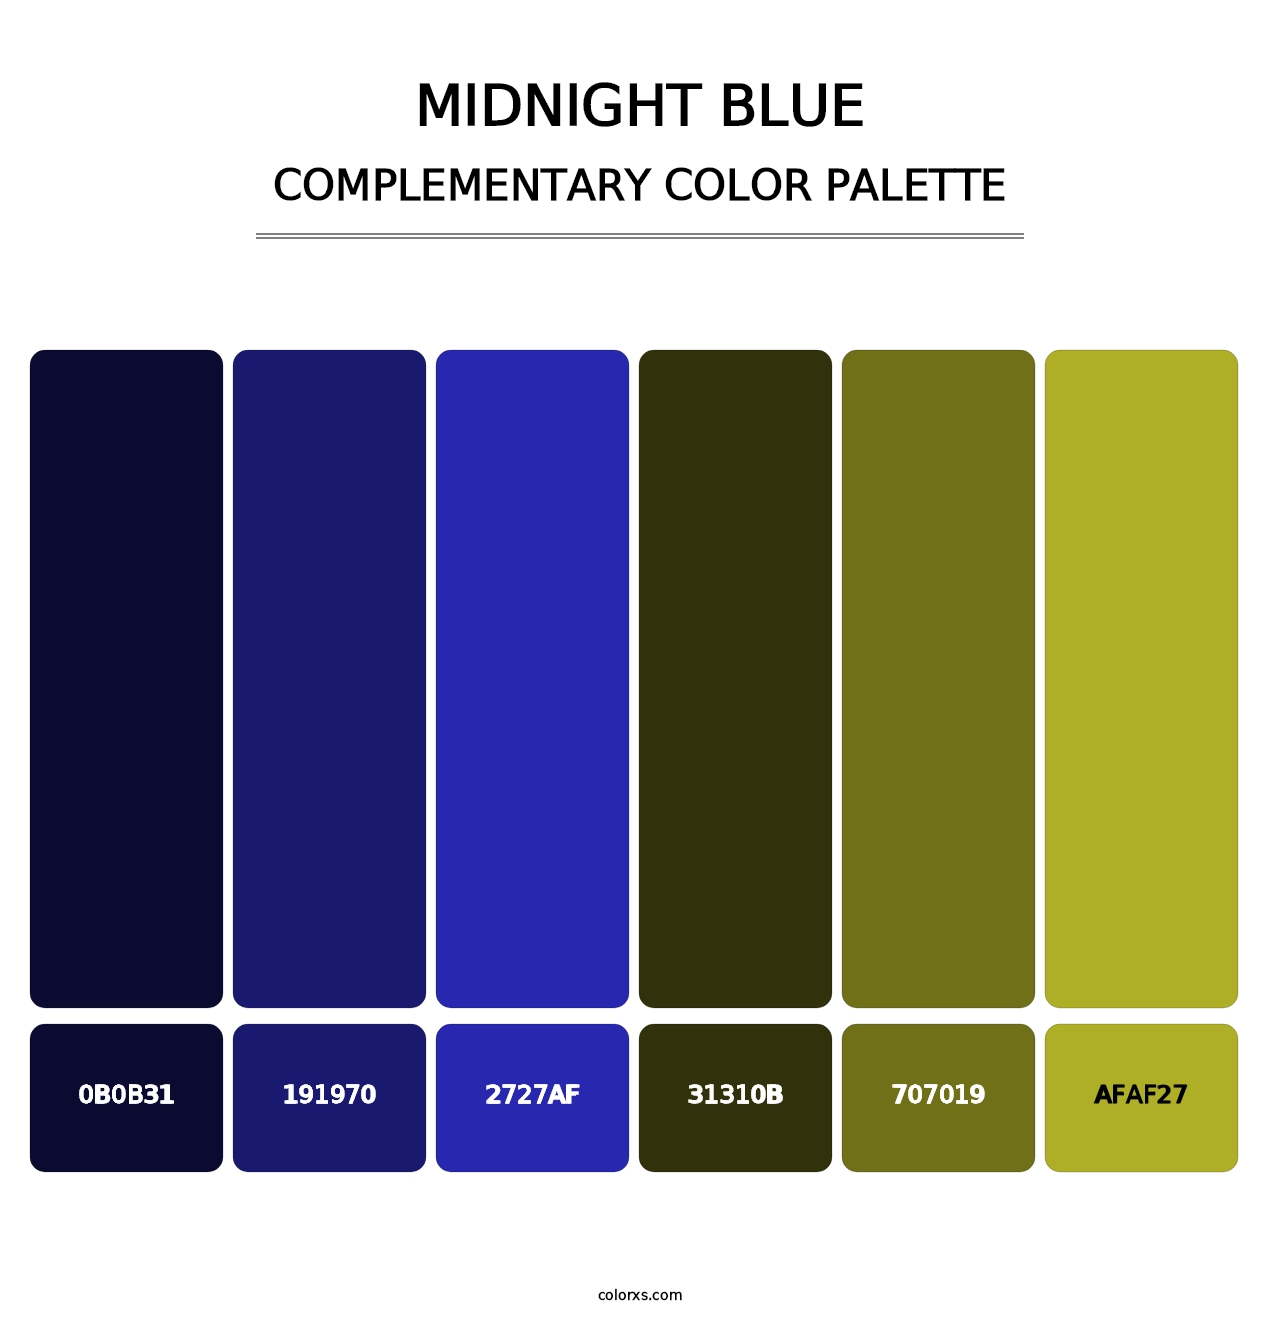 Midnight Blue - Complementary Color Palette